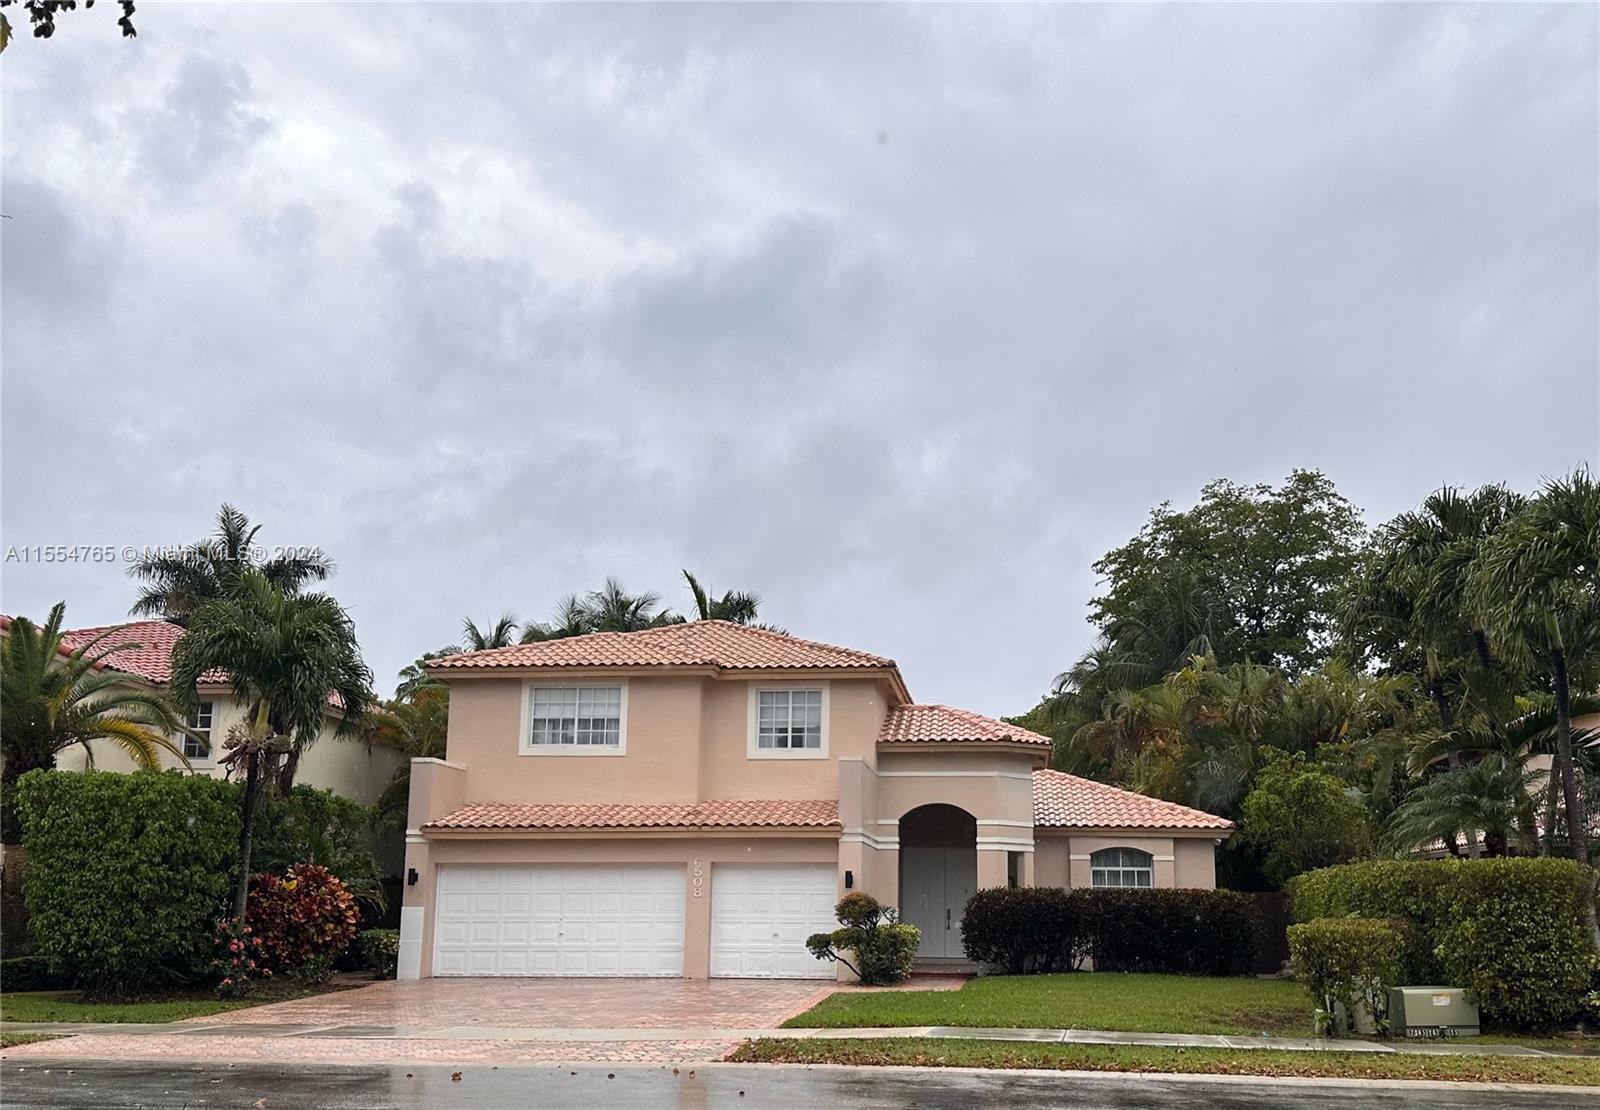 Photo of 6508 NW 113th Pl in Doral, FL